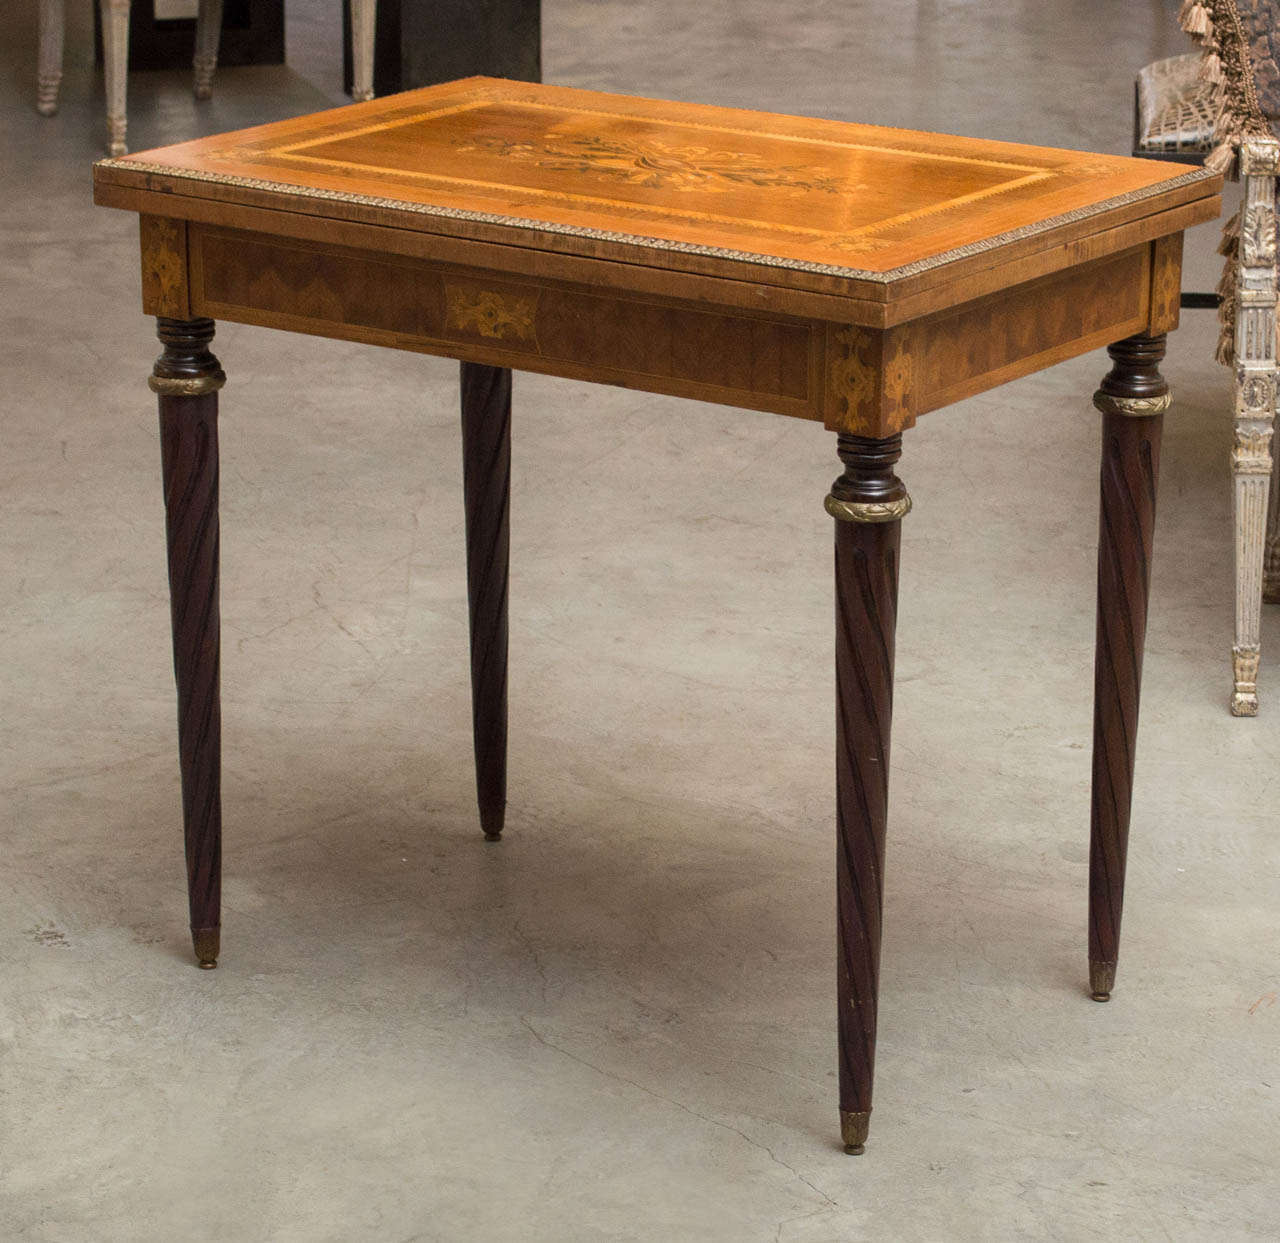 Late 19th Century French fruitwood card table with elaborate mahogany and satinwood inlay depictive vines and musical instruments with bronze detailing and bookmark apron on carved turned legs. Circa 1890